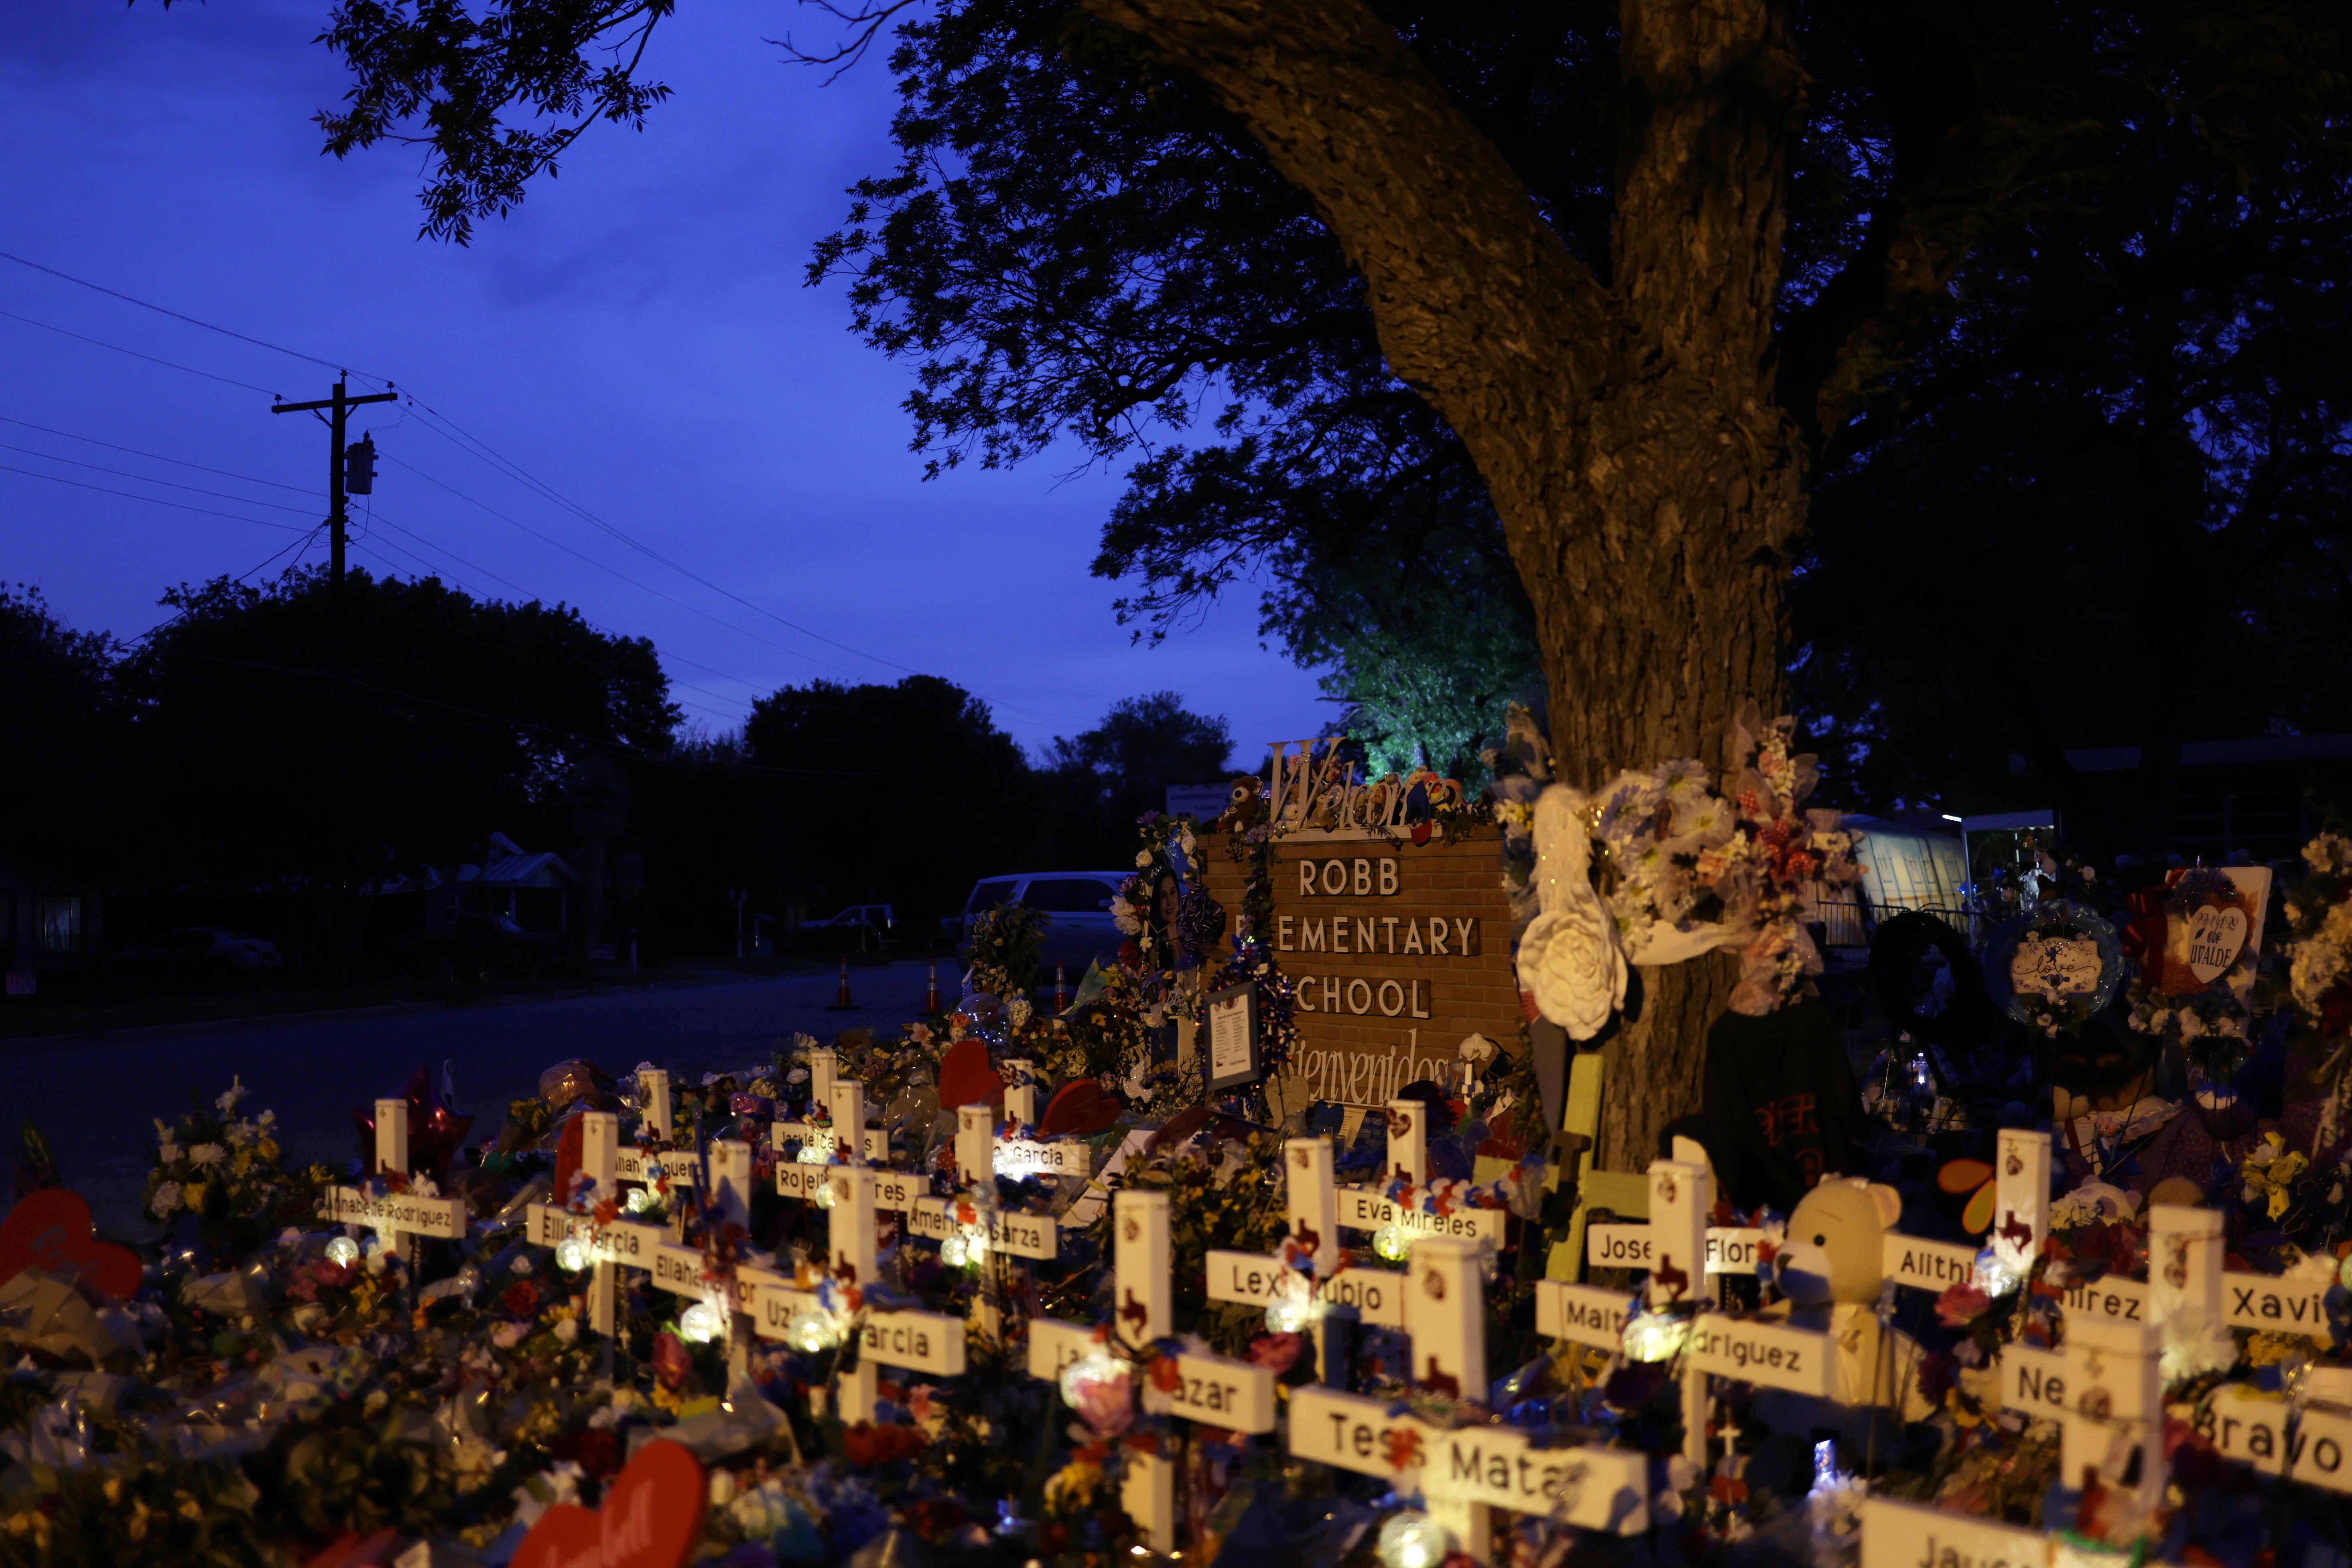 Wooden crosses are placed at a memorial dedicated to the victims of the mass shooting at Robb Elementary School